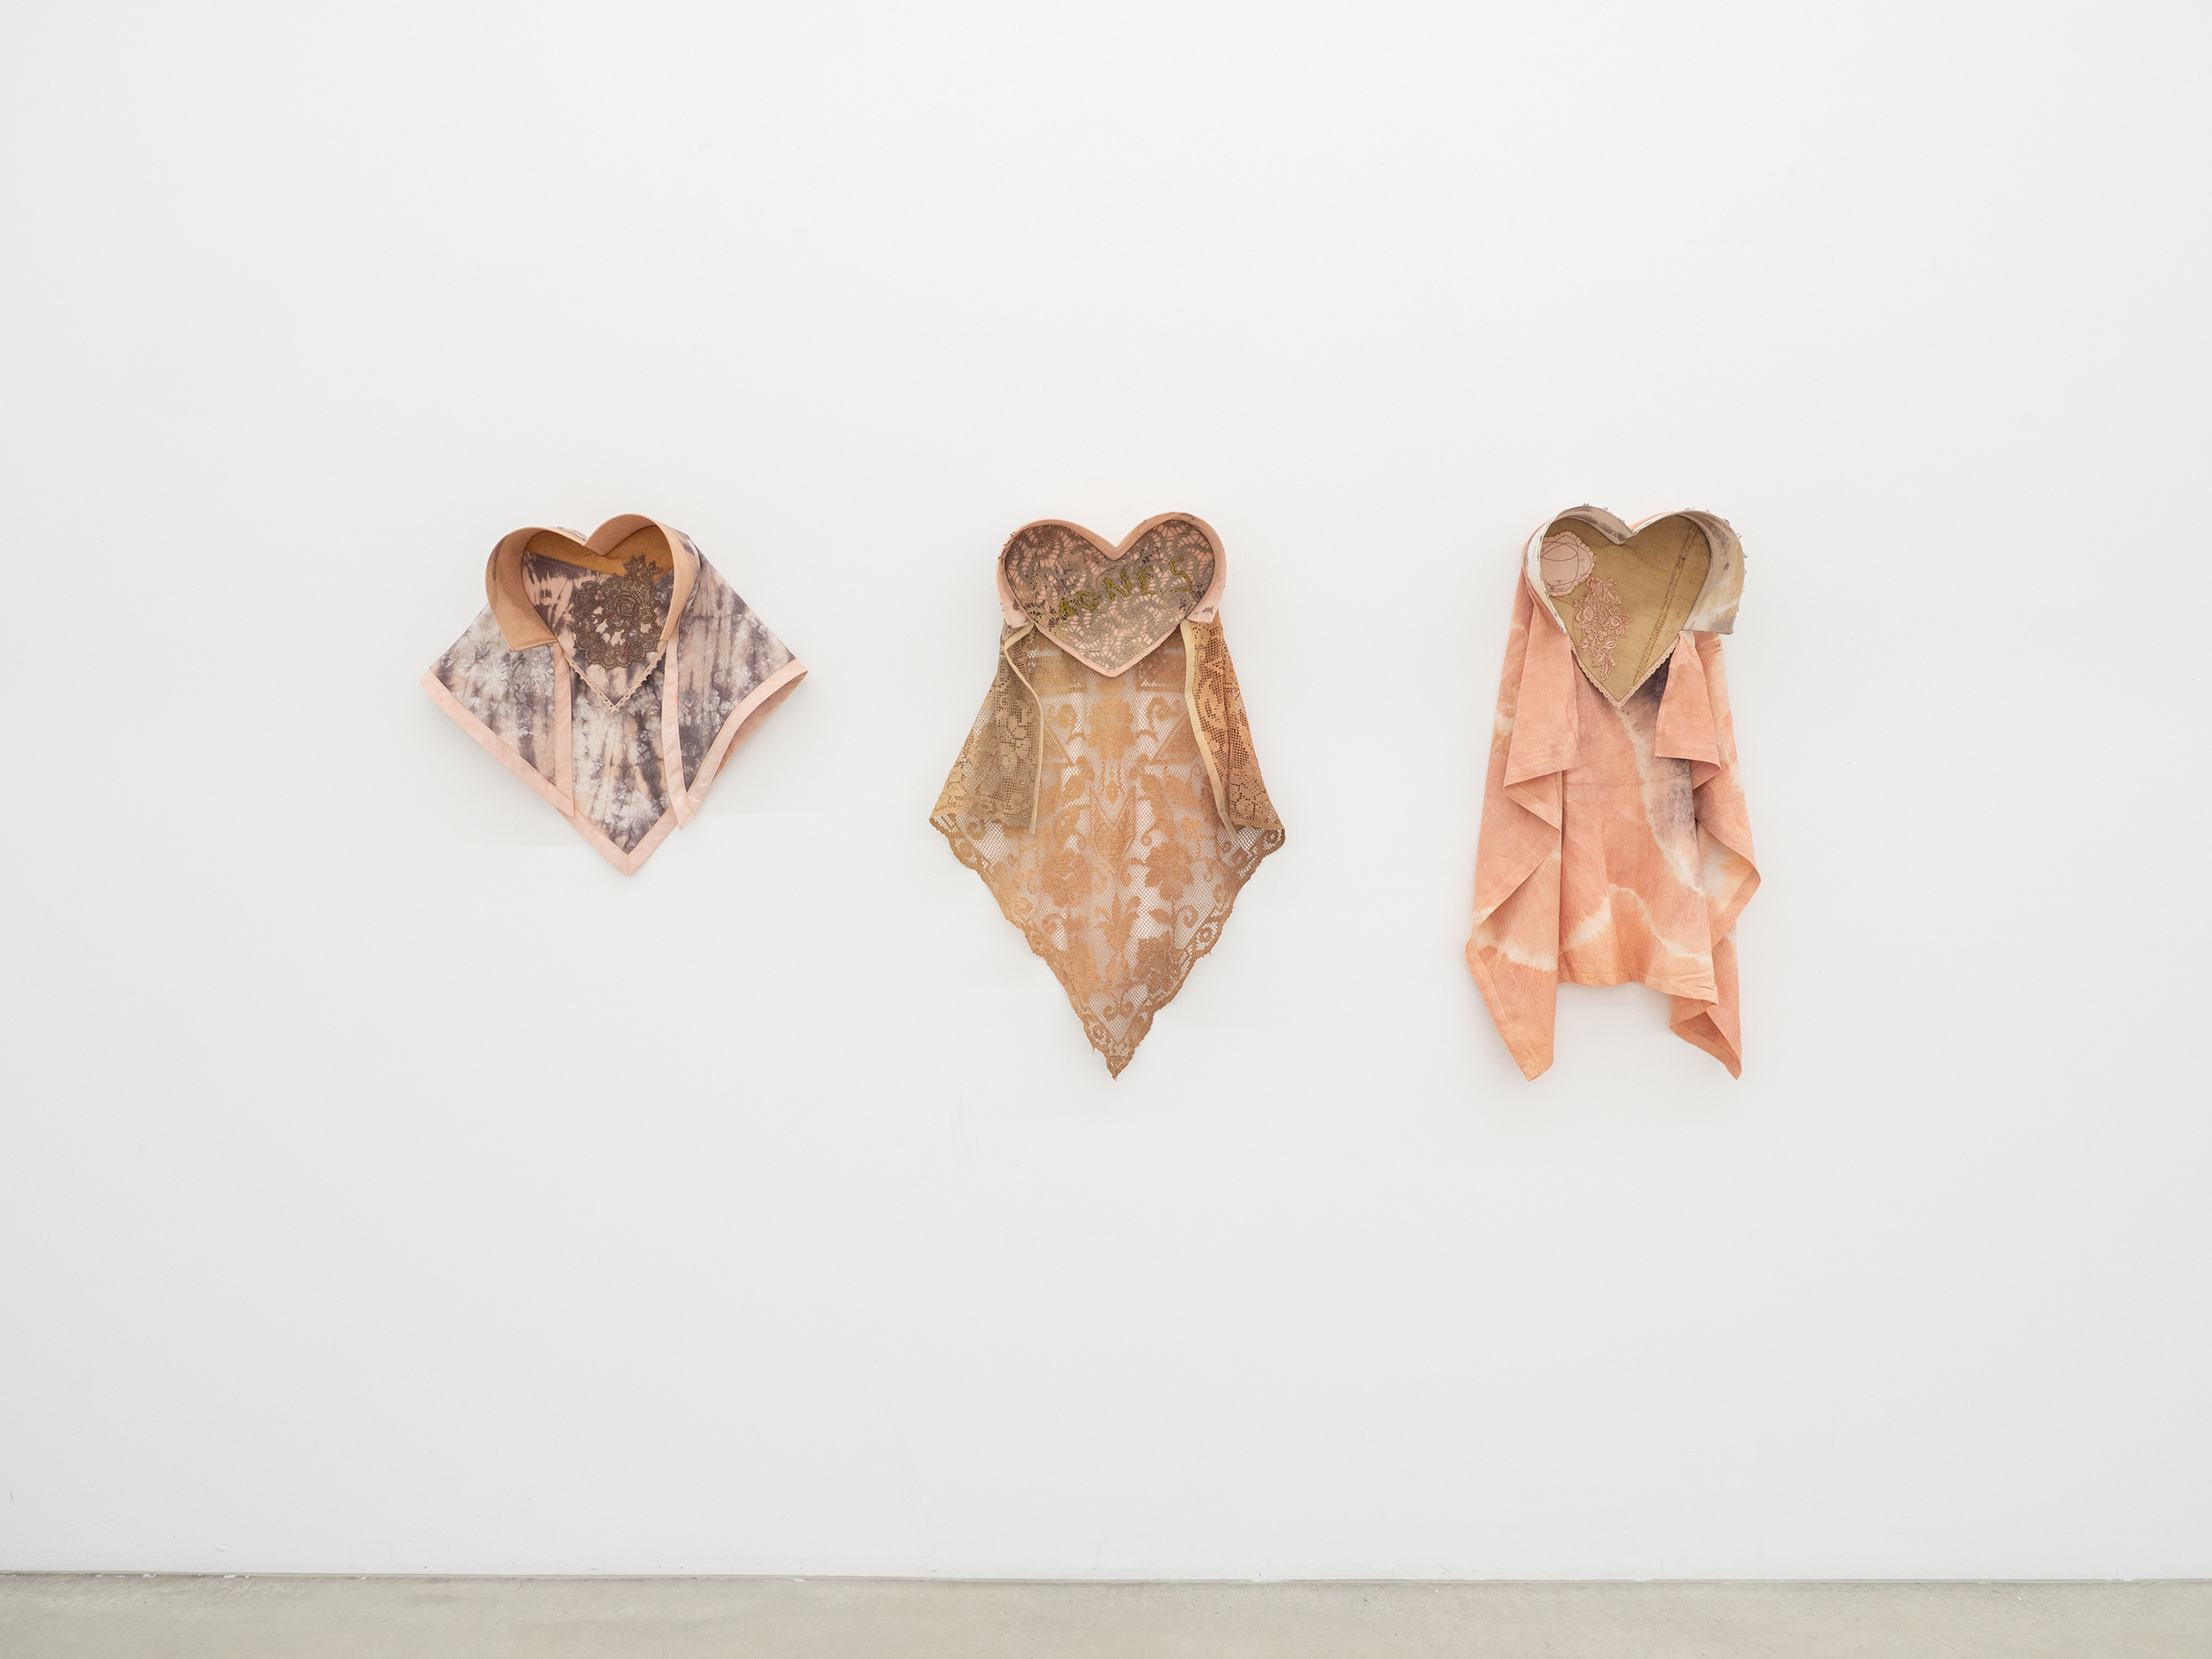 Katherina Zschan, Agnes Huswirt, Elsa Lowlin, Anna Reutinger with Lisa Mazenauer, Barbara Muff and Franca Schaad, Second hand linen, cotton, iron sulfate, tannic acid, onion skins, madder, alder buckthorn, Variable dimensions 